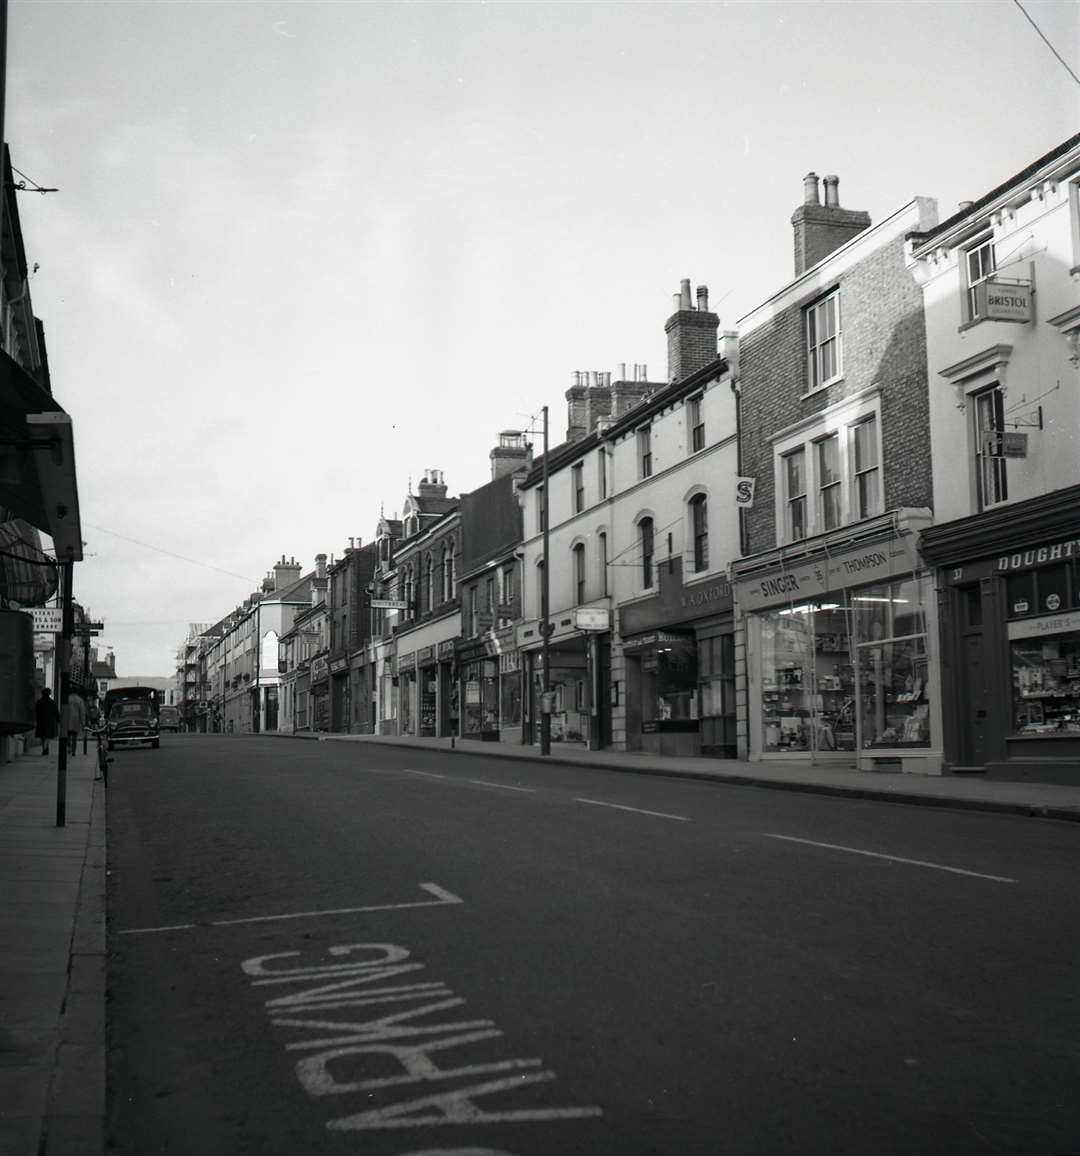 Bank Street, 1962. Another view showing the arterial Bank Street during theearly sixties. The pristine looking street reveals more of the individualindependents that survived pre-modernity and thoughtless tactics that followedyears later. The street was even two-way at this time. Picture: Steve Salter